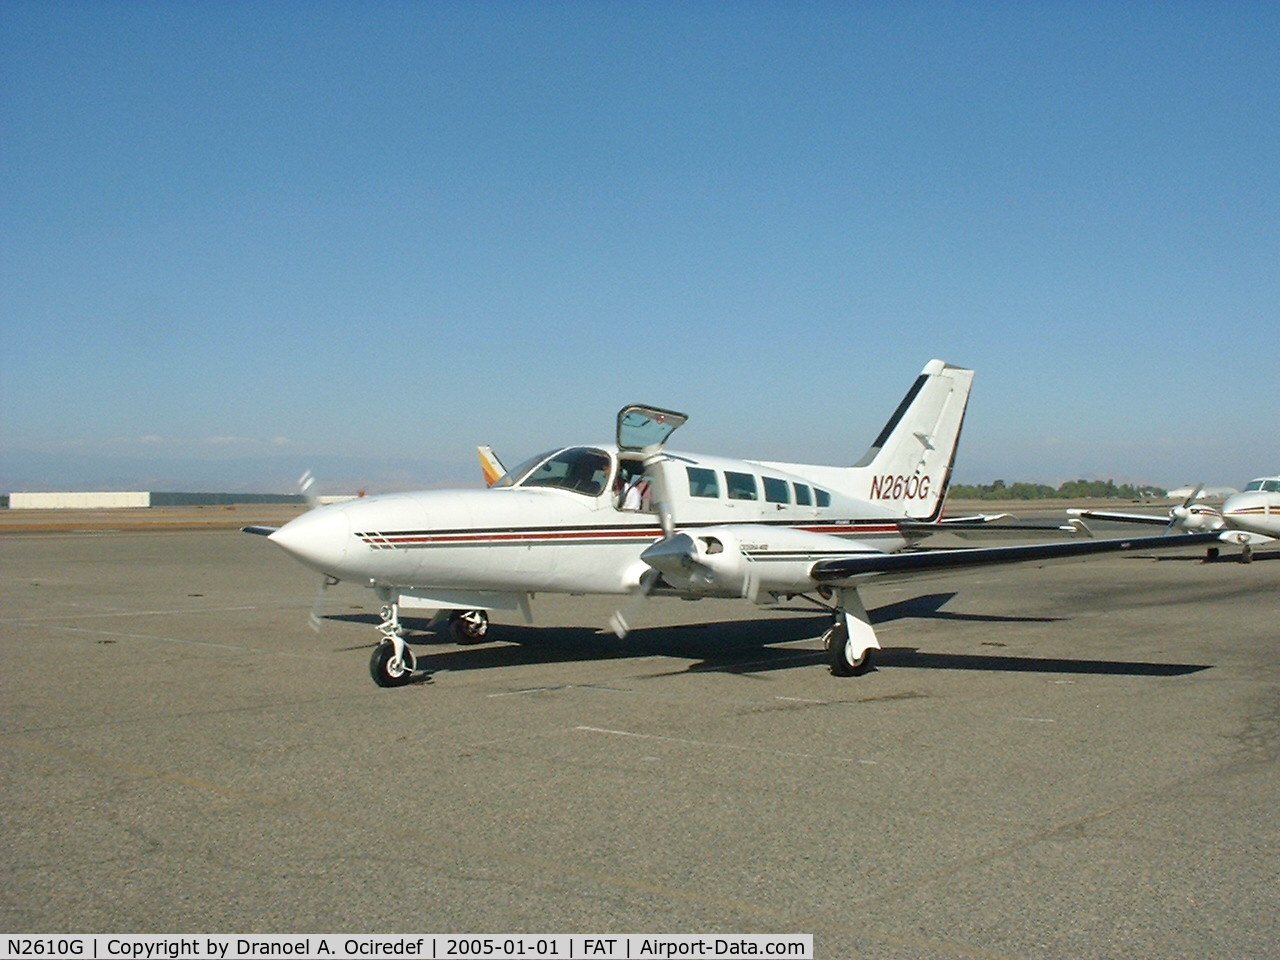 N2610G, 1979 Cessna 402C C/N 402C0064, CE-402C - Owned by Federico Helicopters Inc, Fresno, CA